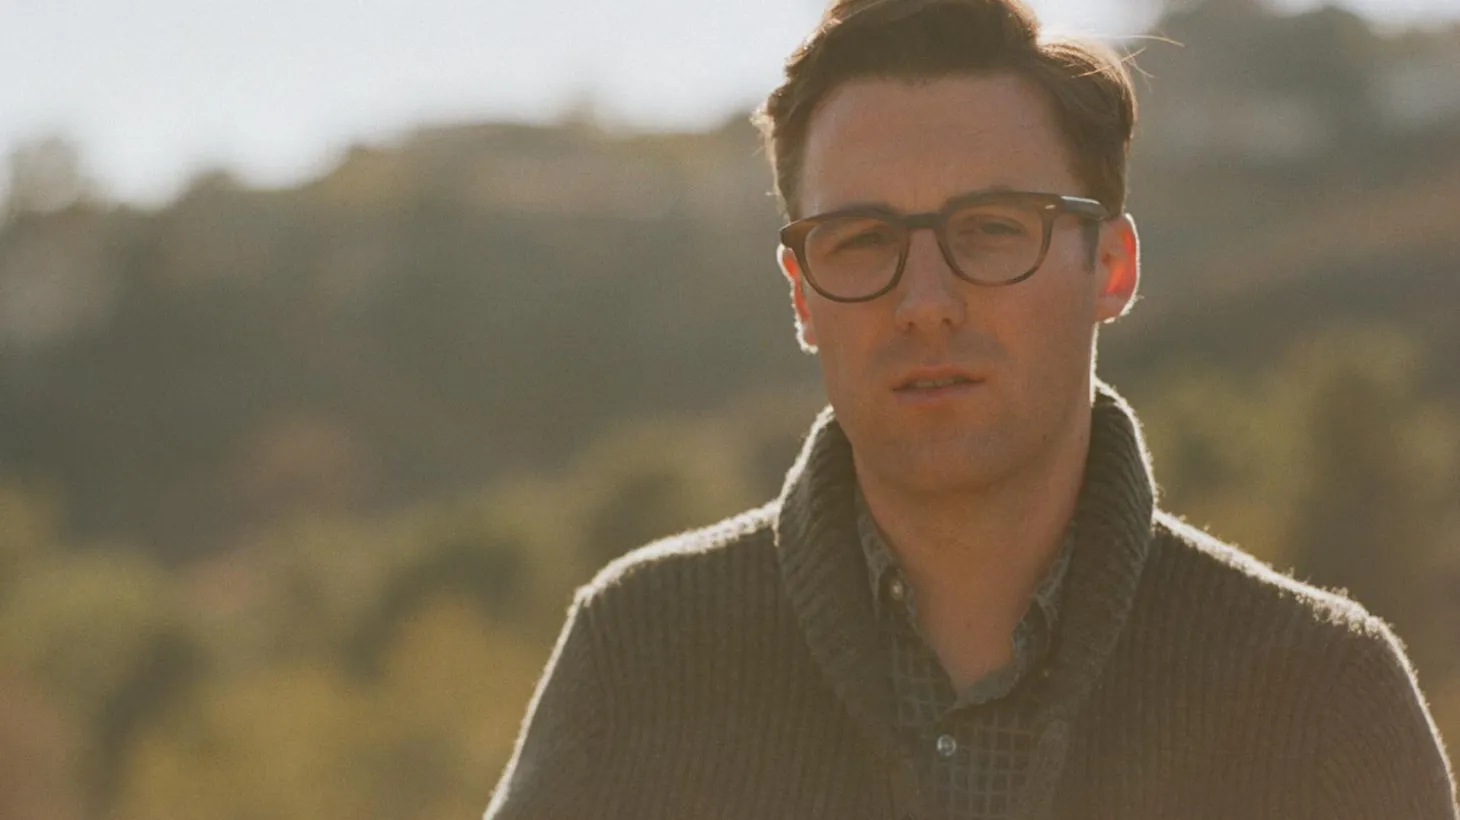 LA's own Nick Waterhouse evokes a juicy mix of R&B, jazz and soul and you can hear it live on Morning Becomes Eclectic.